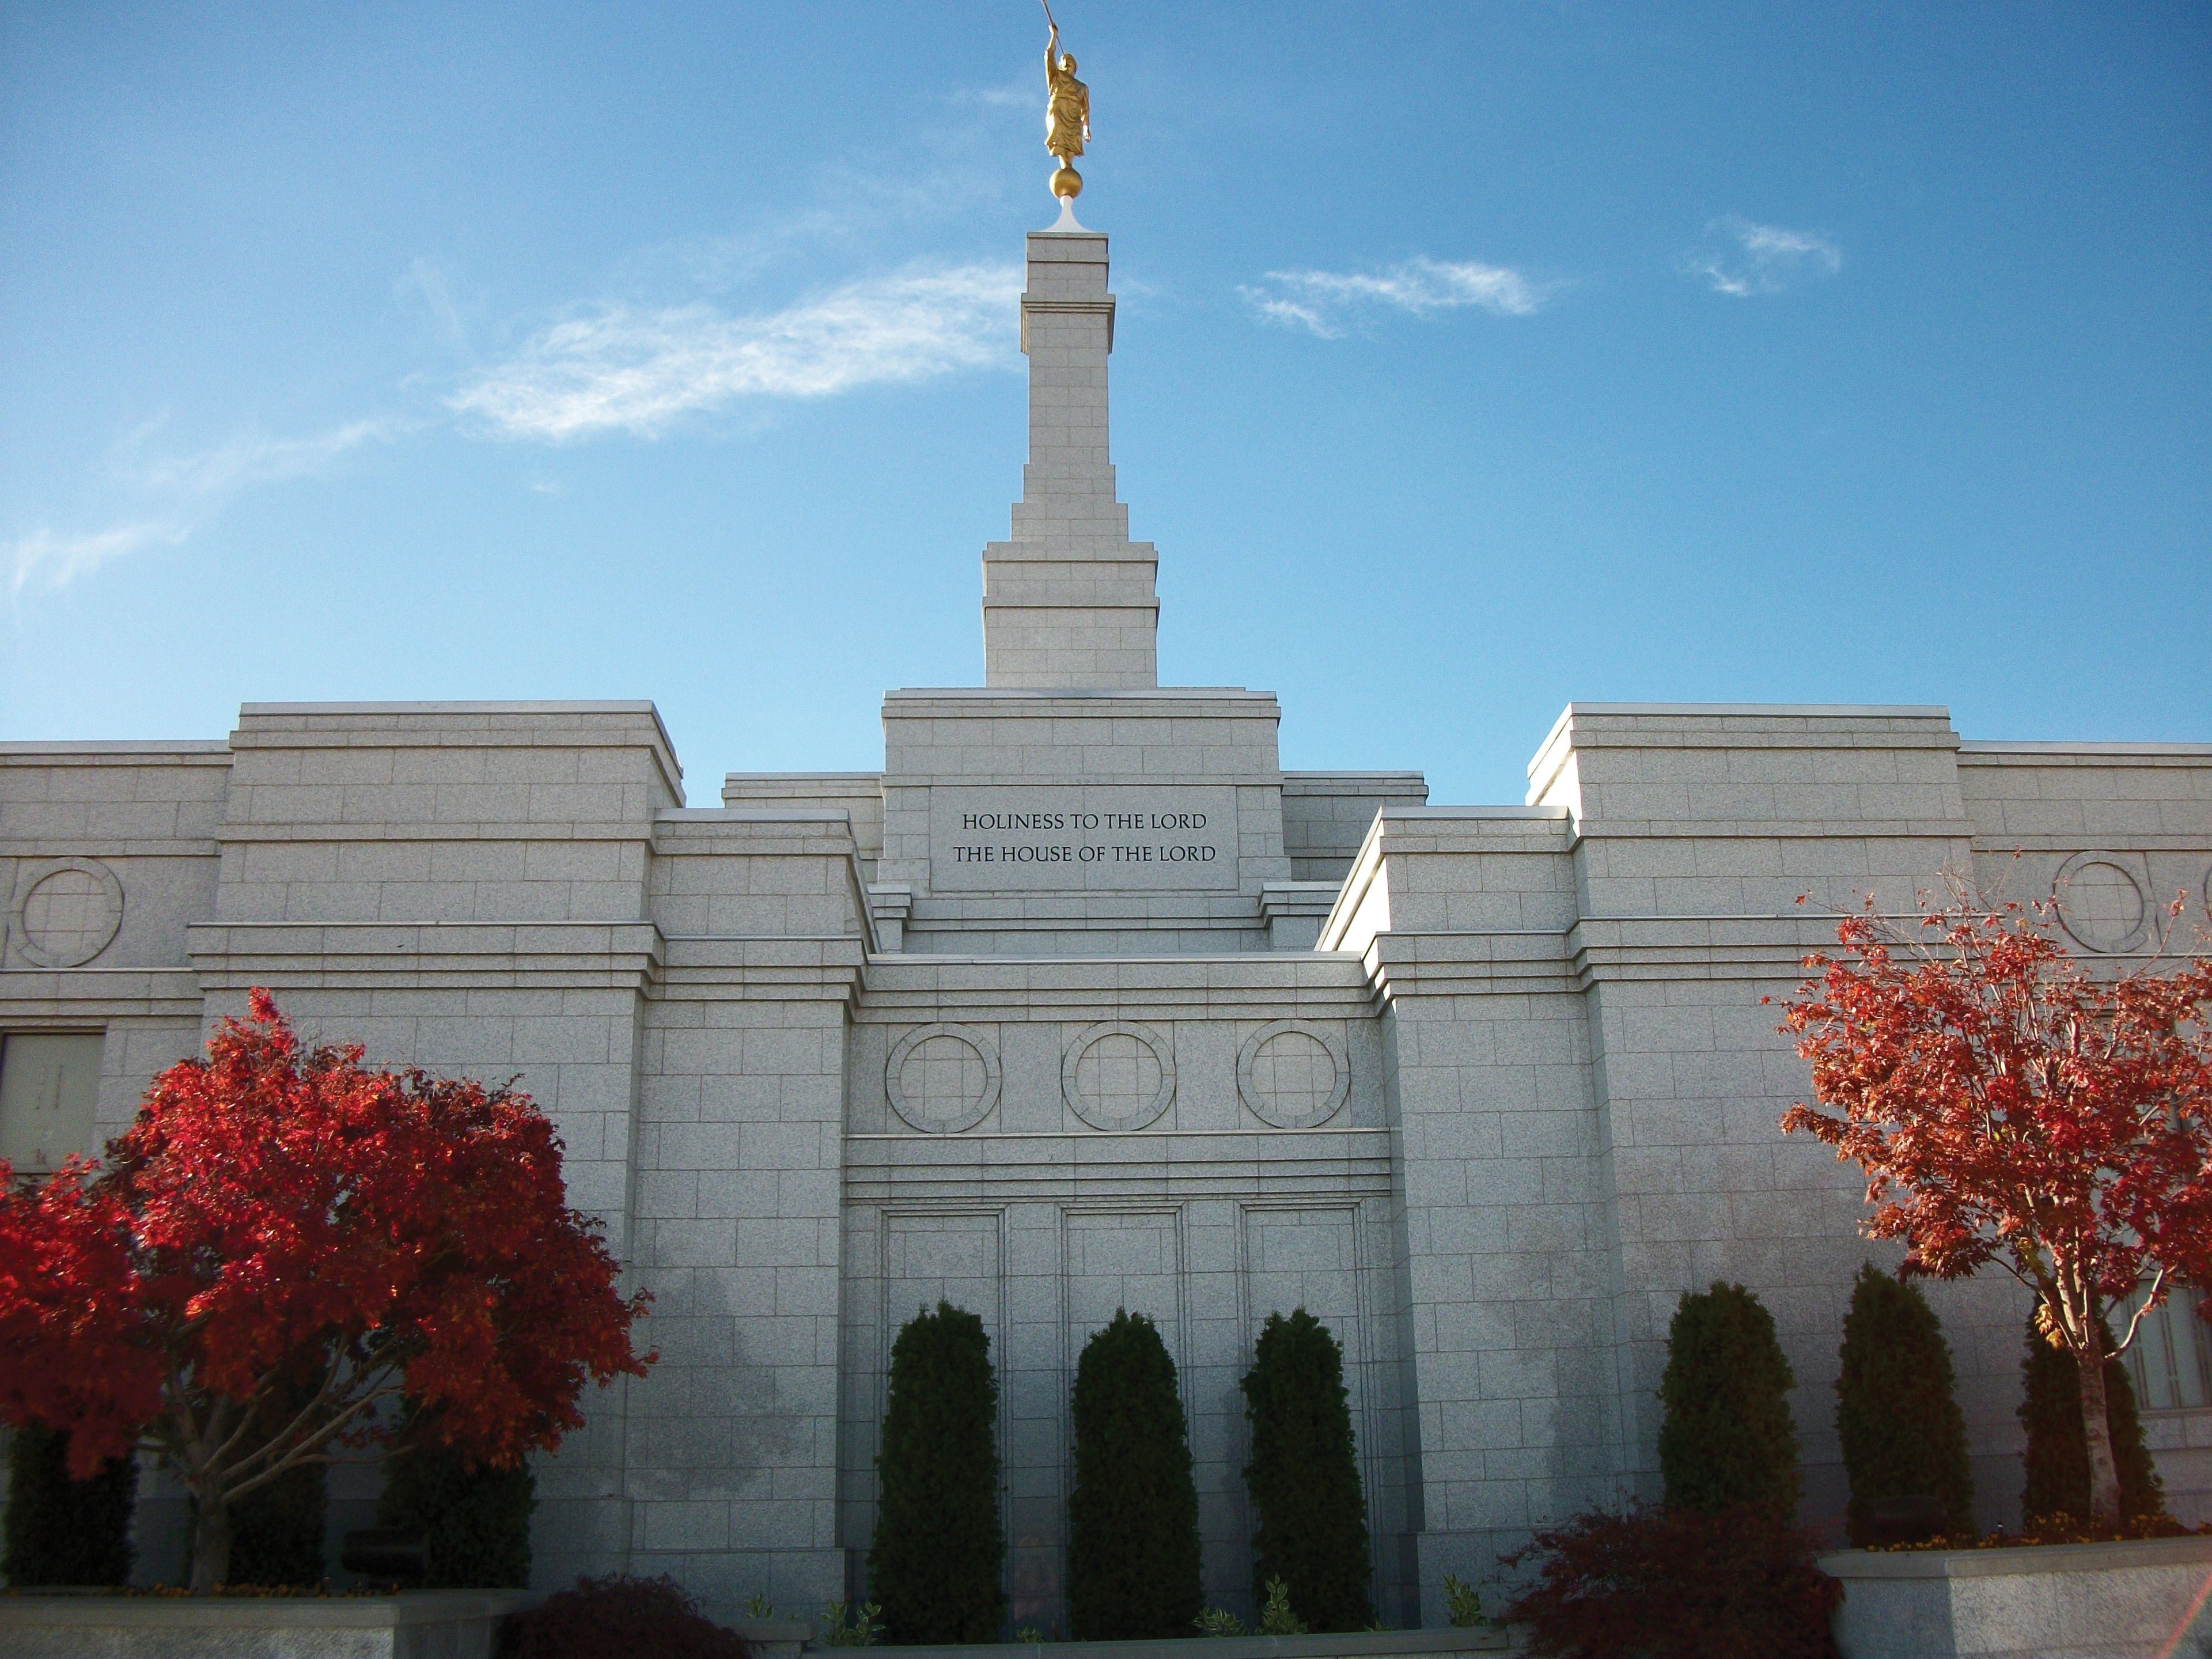 The Reno Nevada Temple in the fall, including “Holiness to the Lord: The House of the Lord” and scenery.